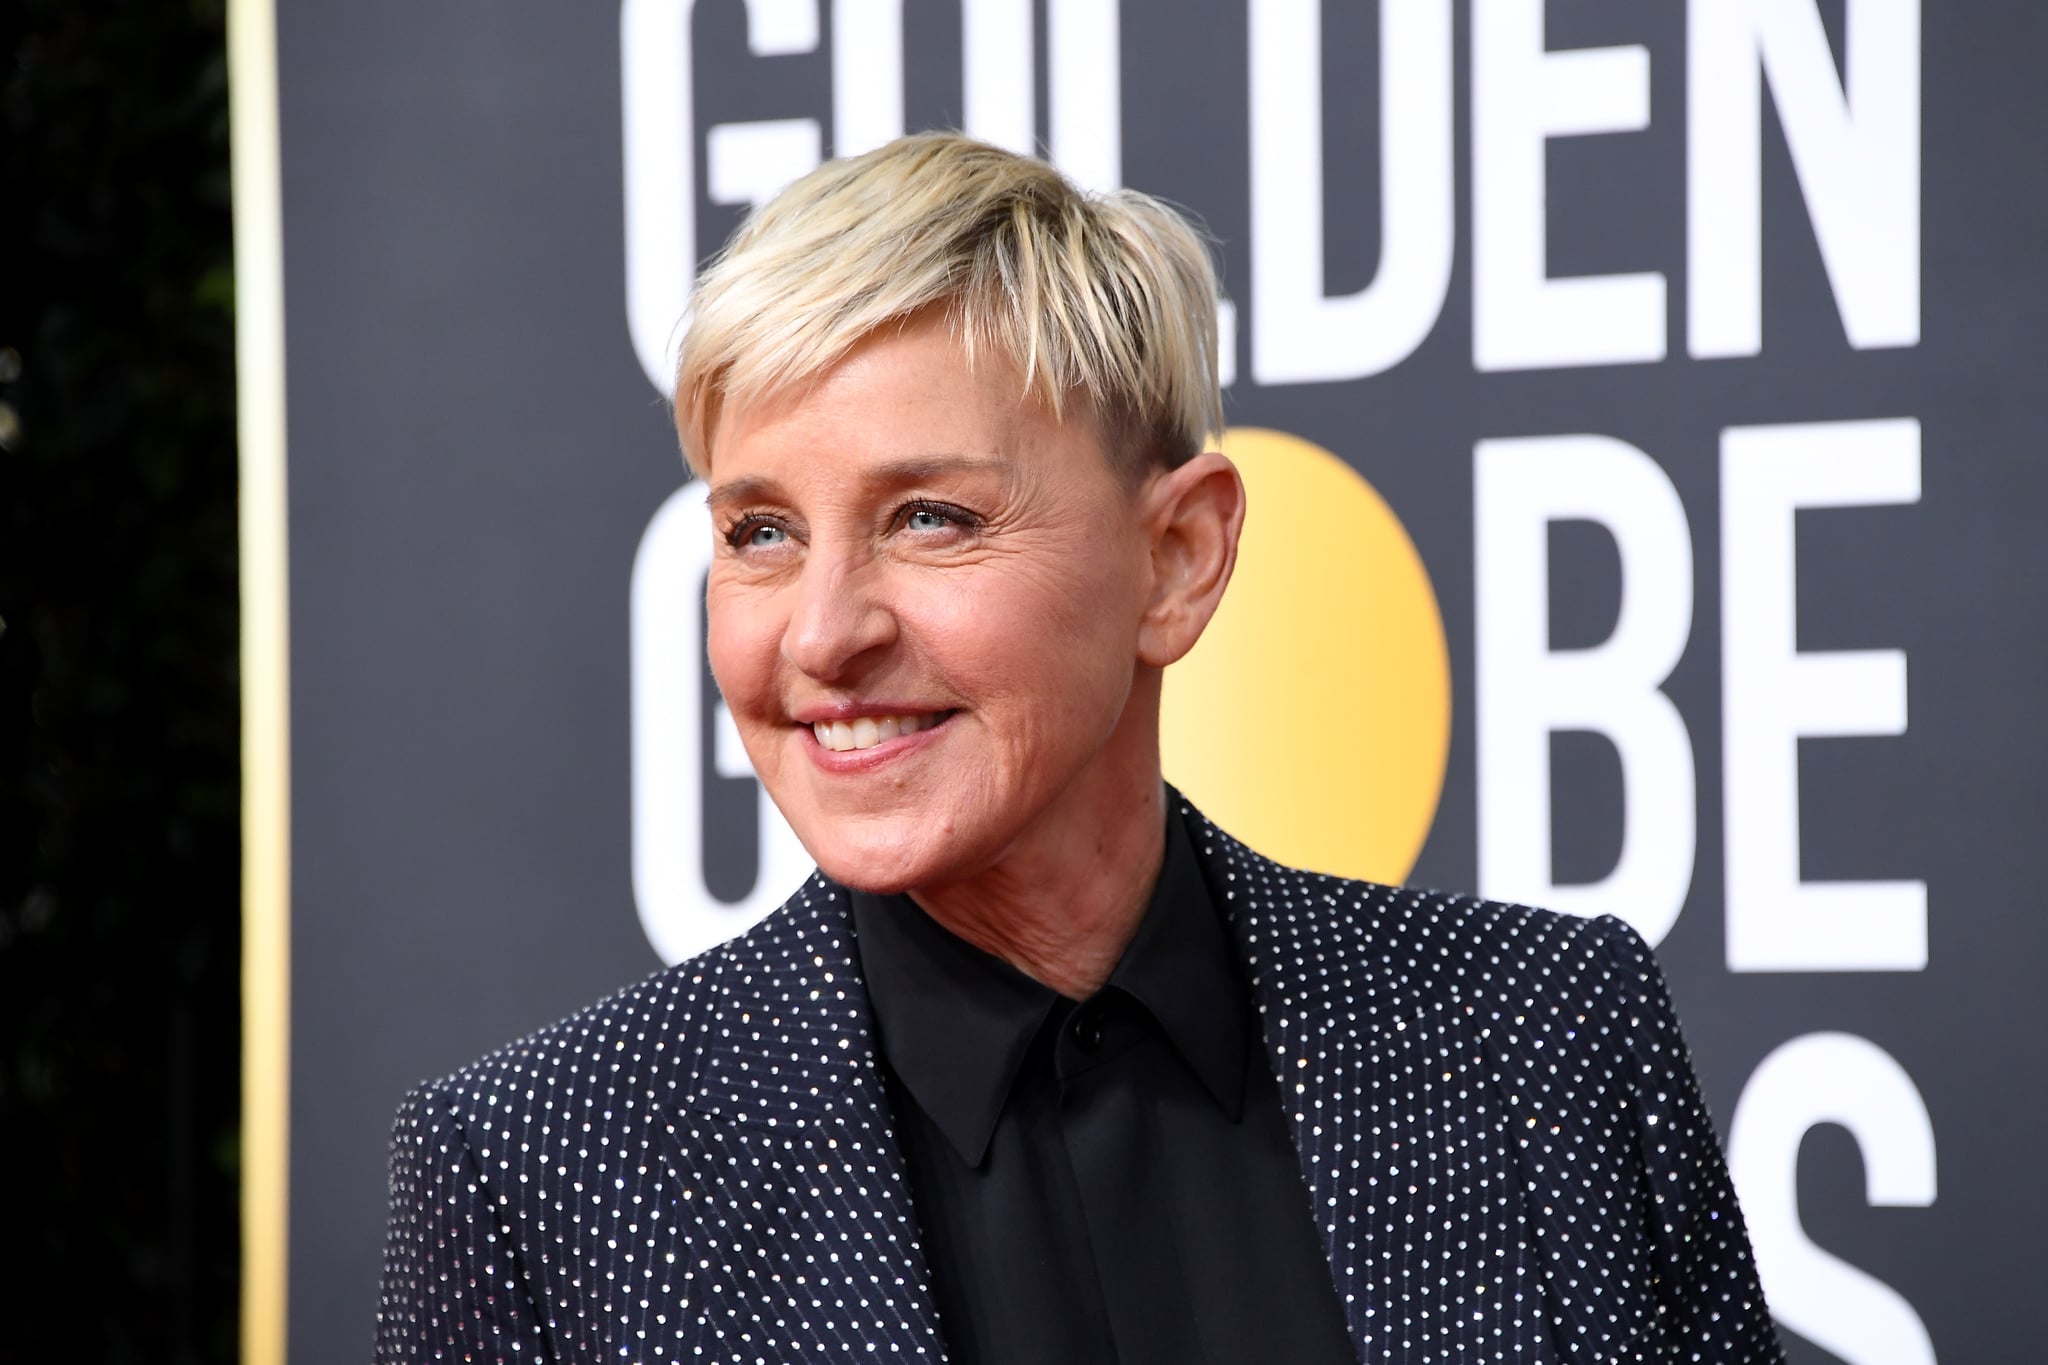 BEVERLY HILLS, CALIFORNIA - JANUARY 05: Ellen DeGeneres attends the 77th Annual Golden Globe Awards at The Beverly Hilton Hotel on January 05, 2020 in Beverly Hills, California. (Photo by Steve Granitz/WireImage)